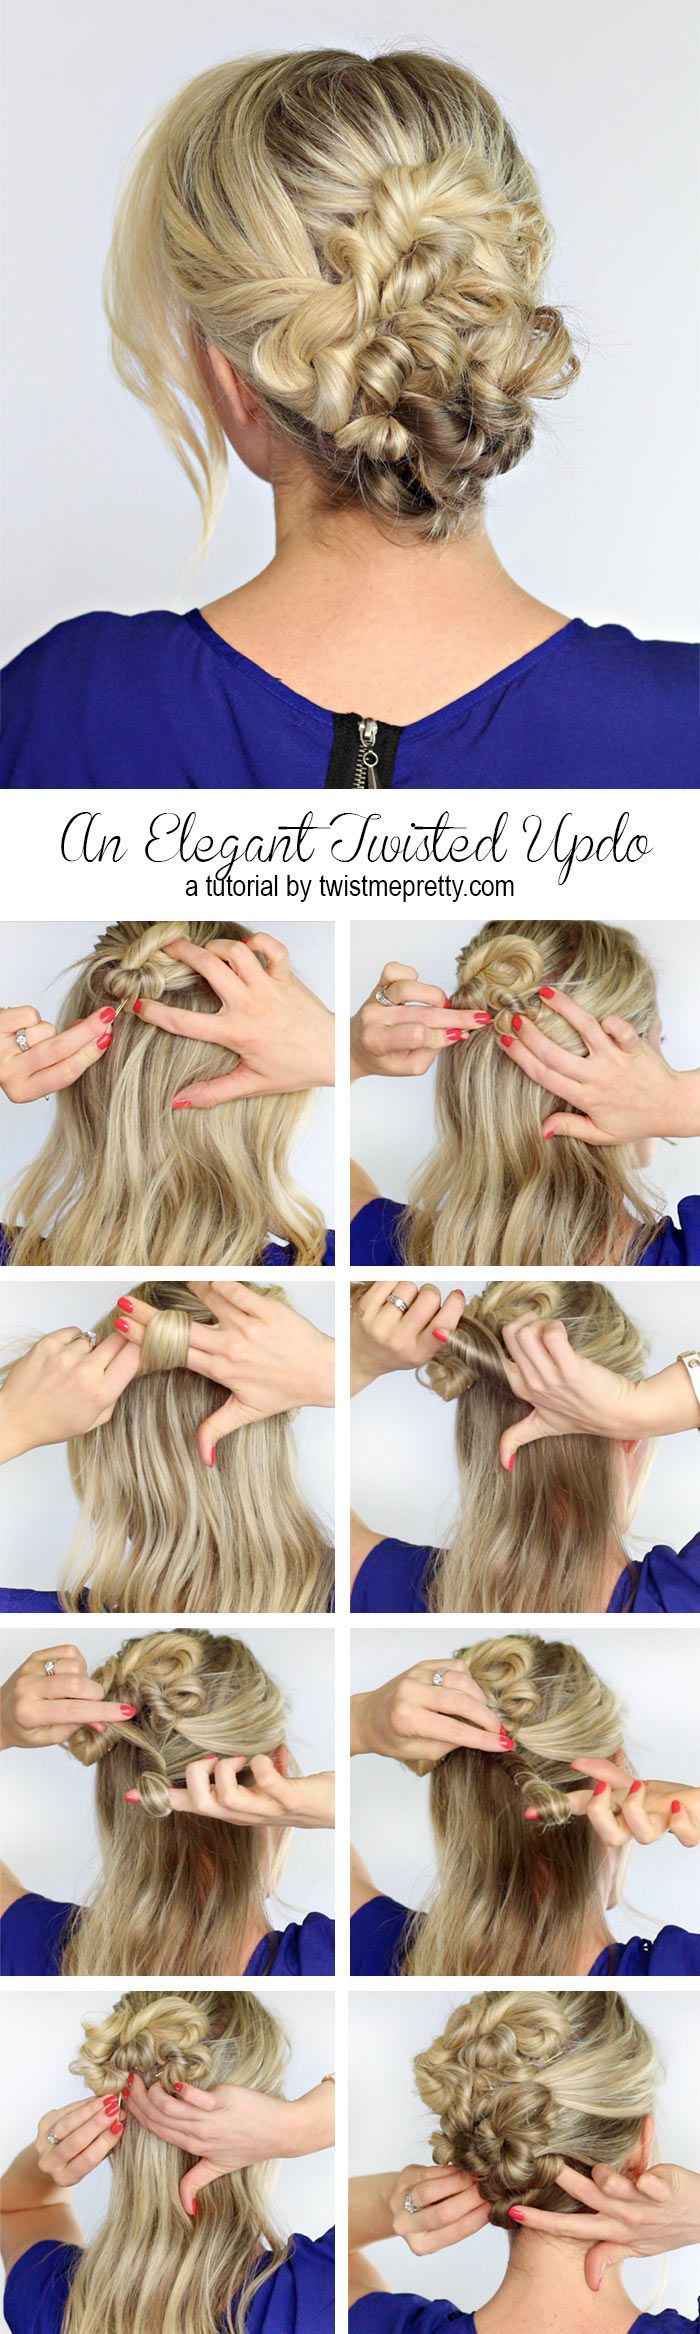 22 Curly Prom Hairstyles for Your Stunning Prom Night Look